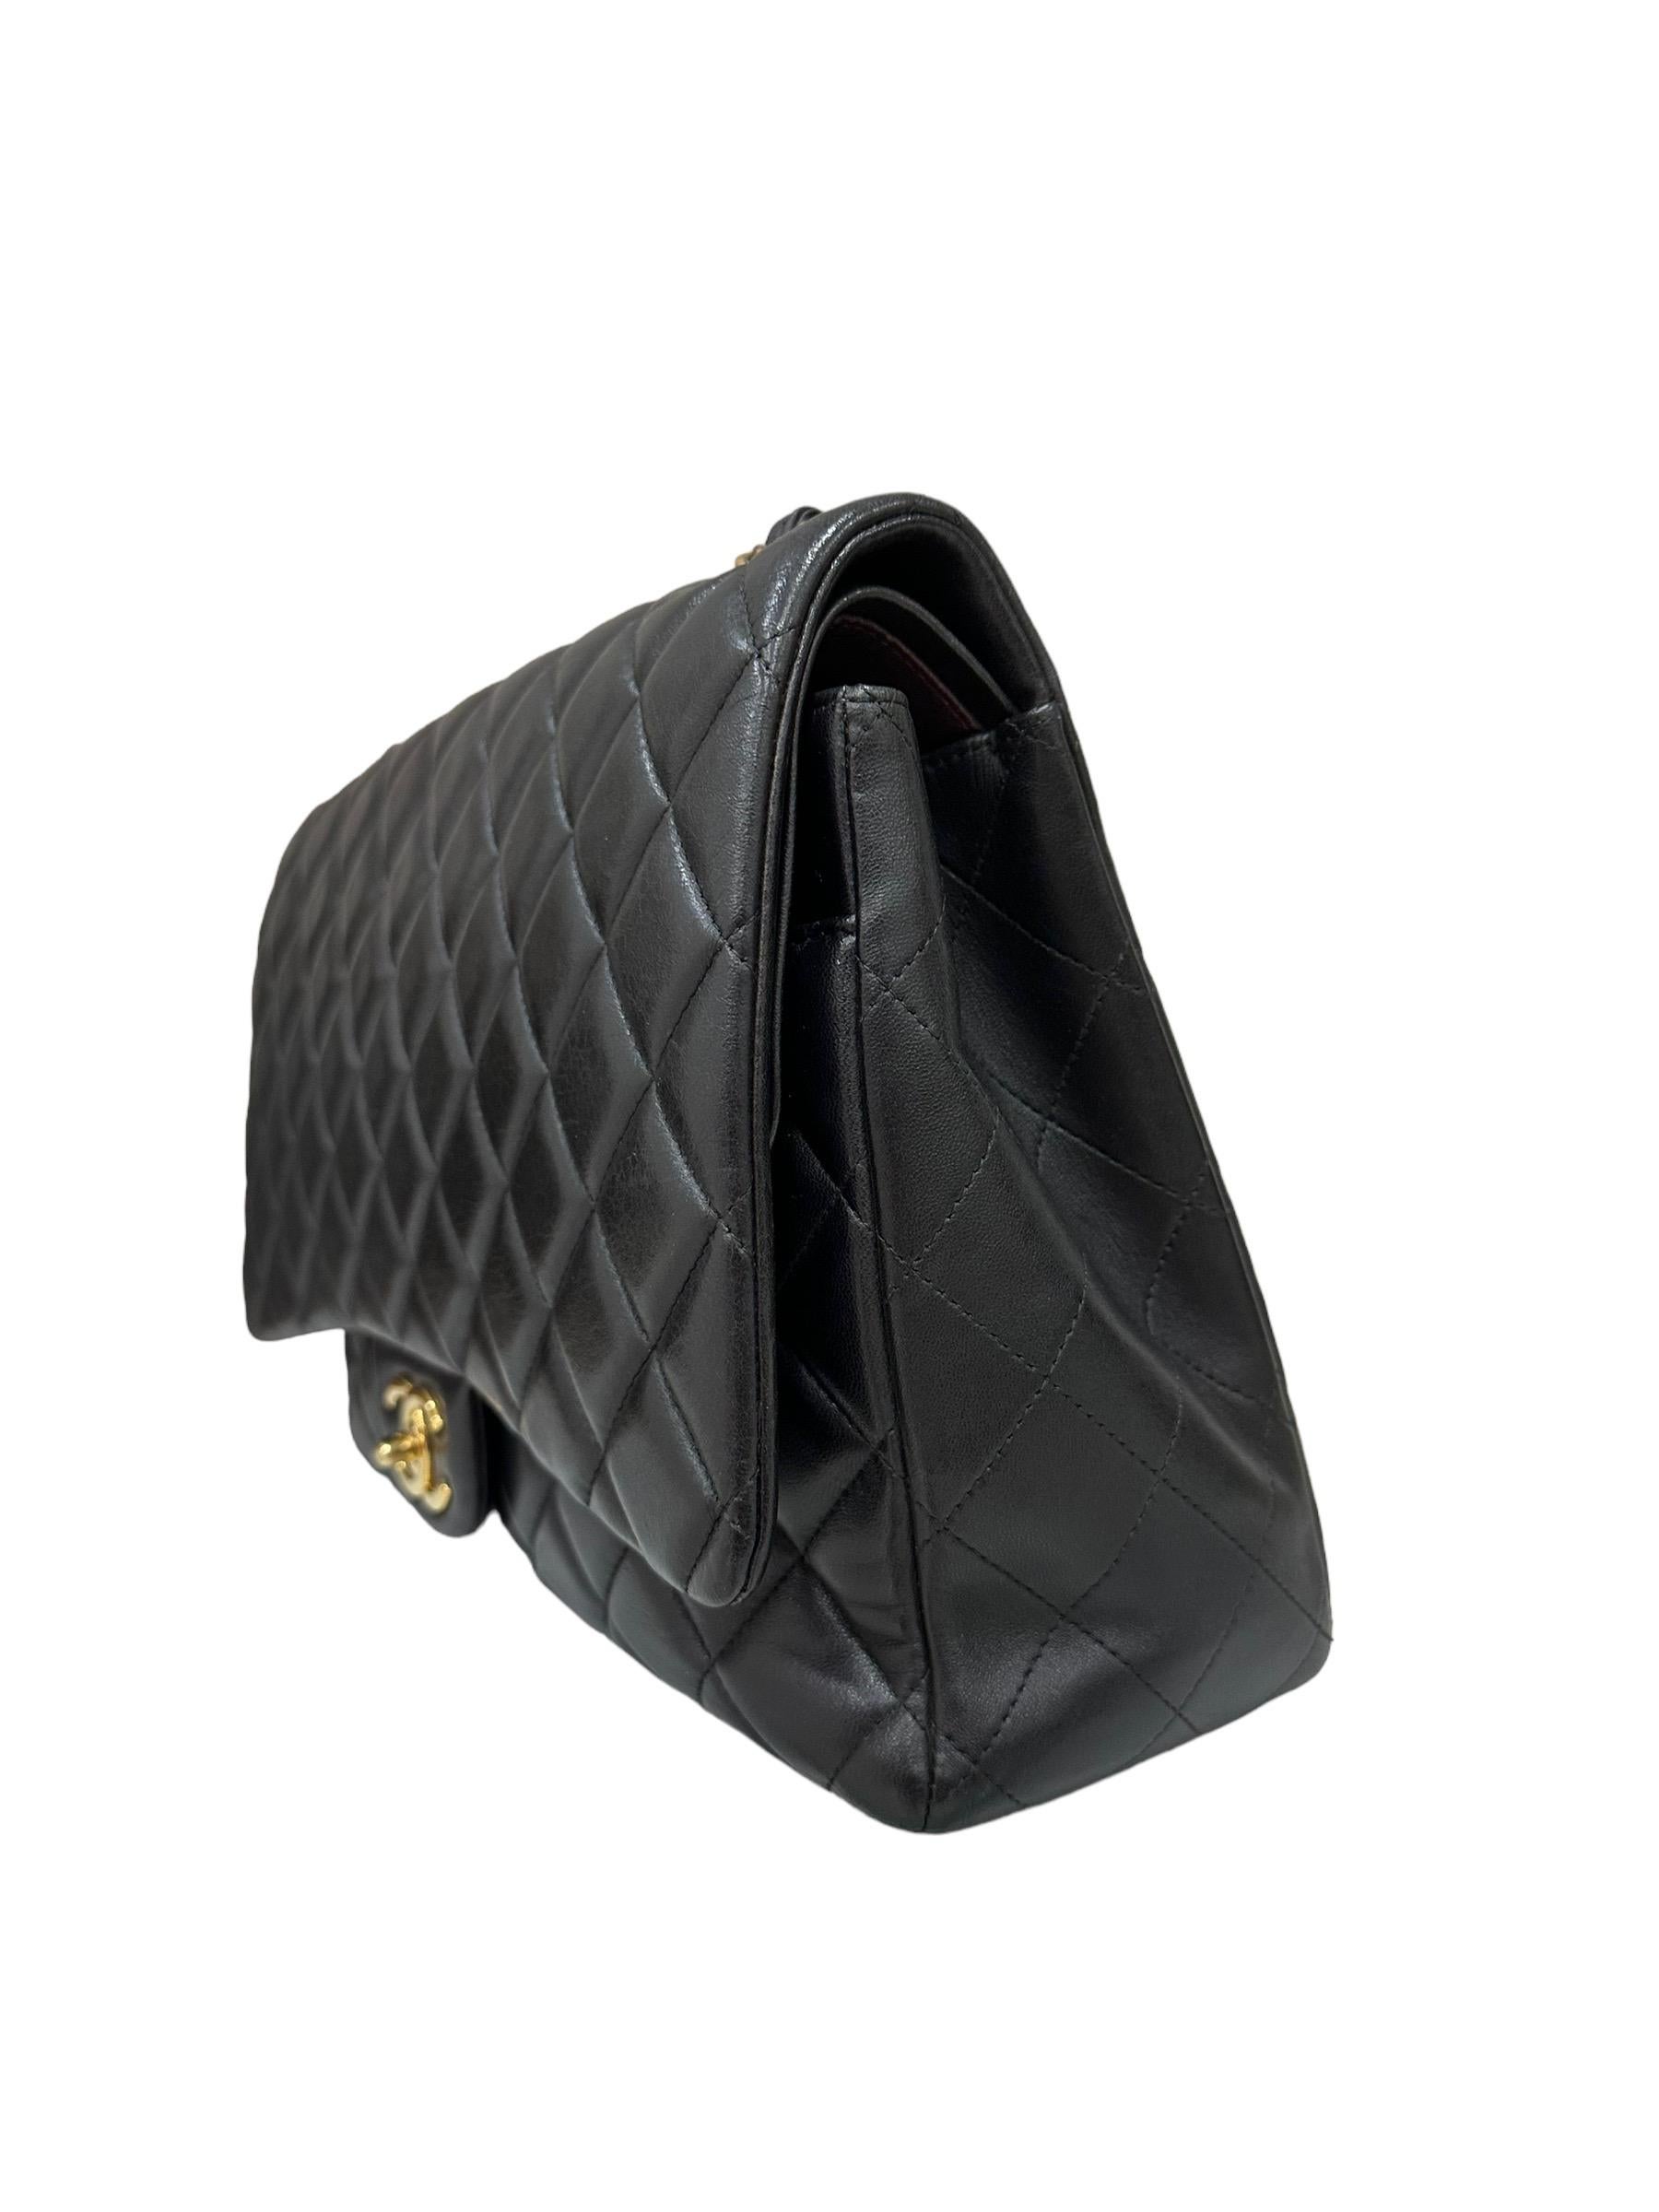 2011 Chanel Timeless Maxi Jumbo Black Leather Top Shoulder Bag In Good Condition In Torre Del Greco, IT